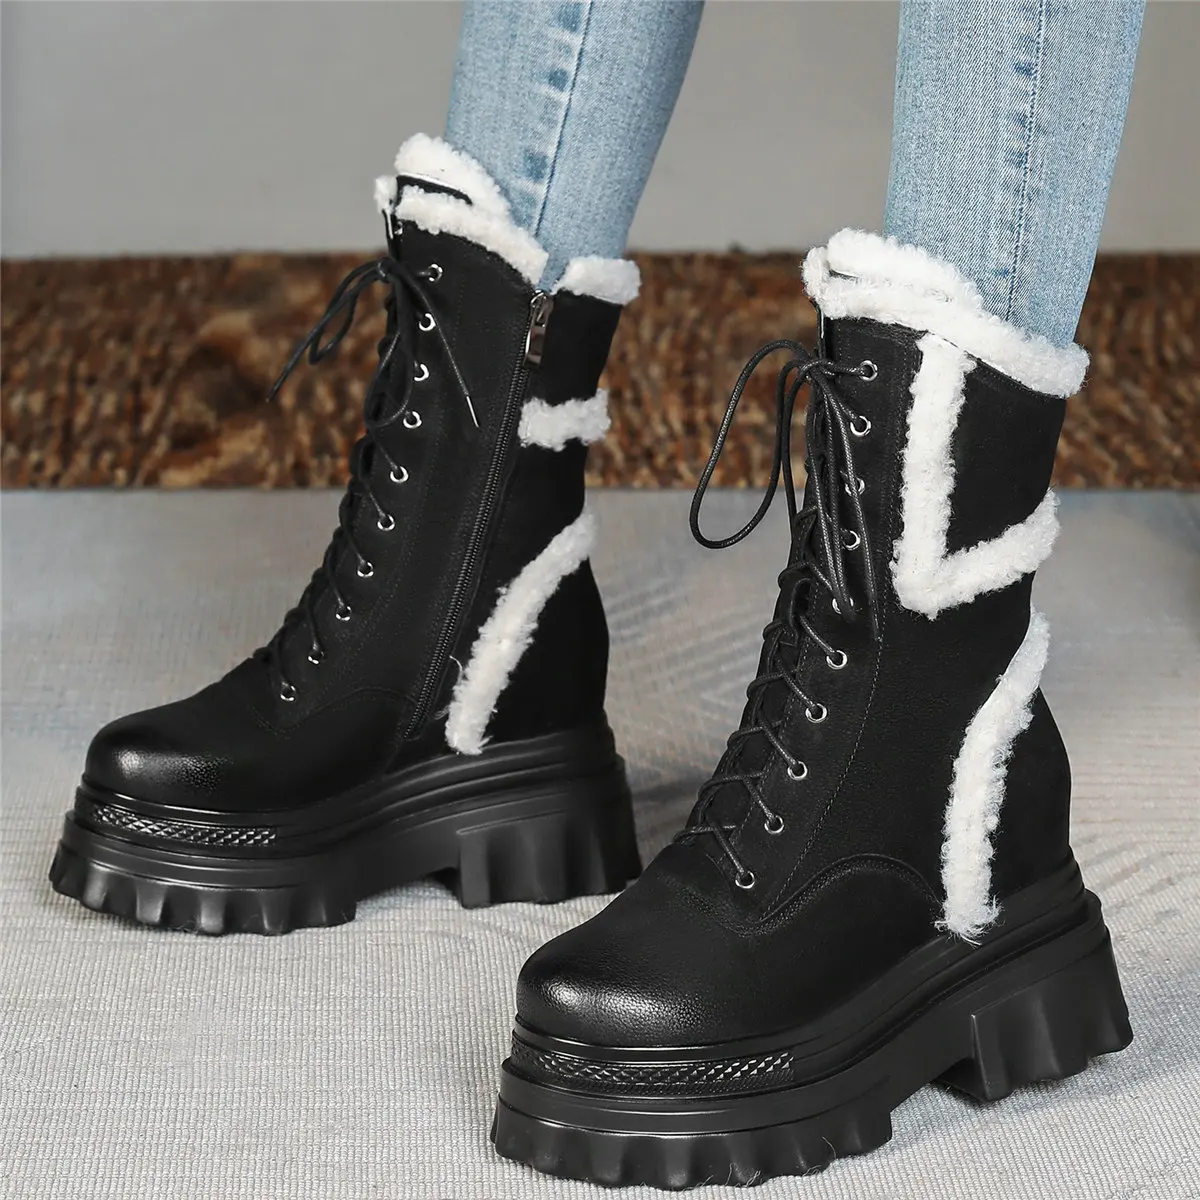 

Winter Fashion Sneakers Women Lace Up Genuine Leather High Heel Snow Boots Female Round Toe Chunky Platform Pumps Casual Shoes